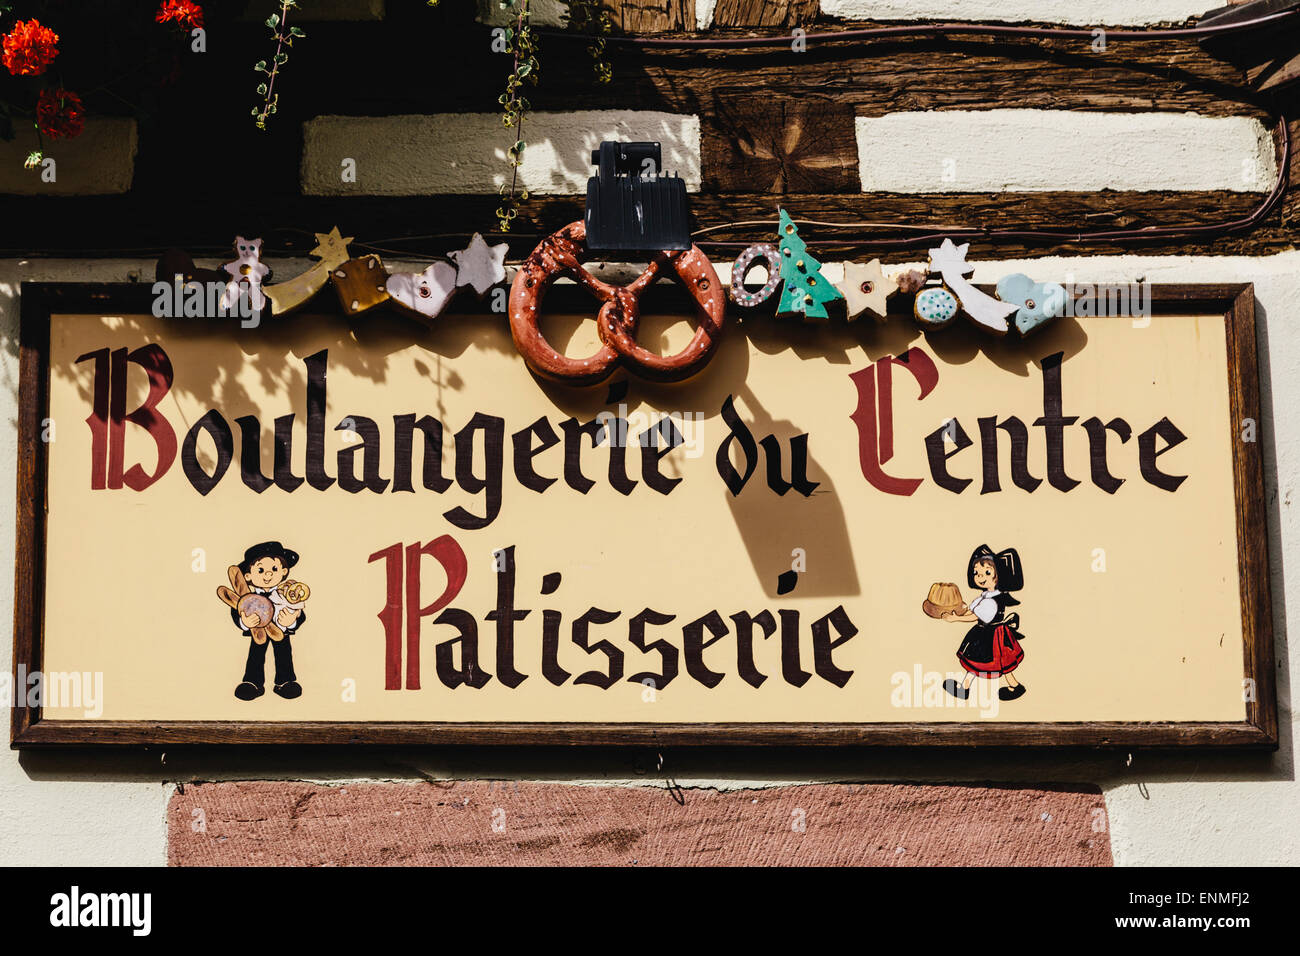 Shop sign, detail of building, Kaysersberg, Alsace, France Stock Photo